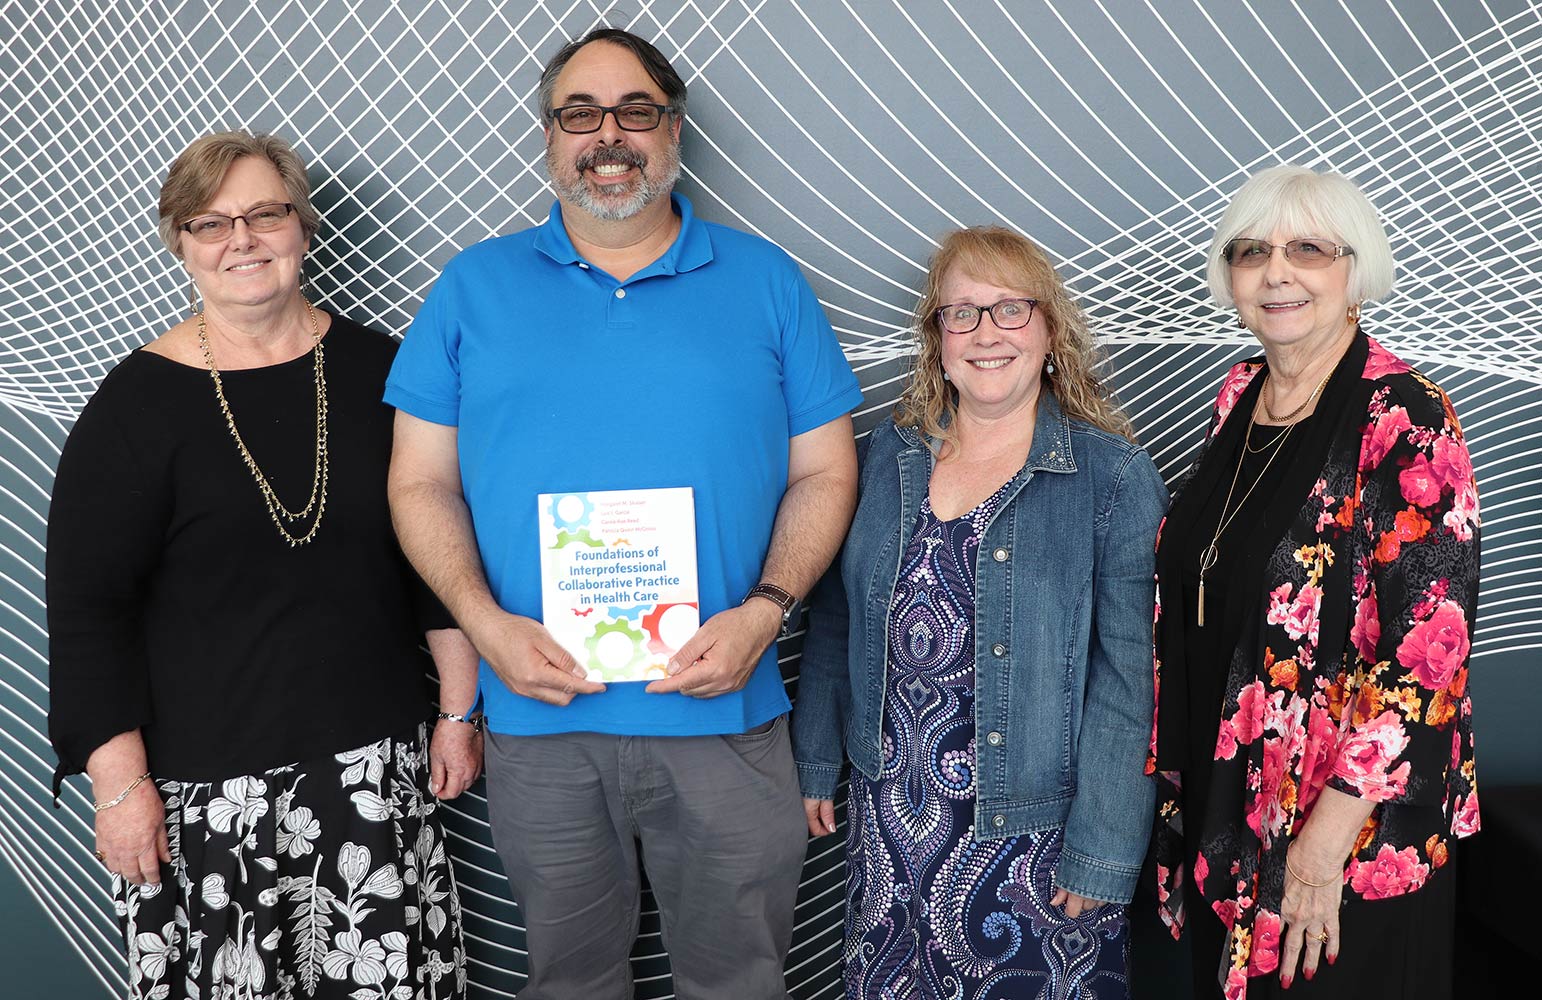 From left, Margaret Slusser, Luis Garcia, Patricia McGinnis and Carole-Rae Reed smile with their collaborative textbook, “Foundations of Interprofessional Collaborative Practice in Health Care.”